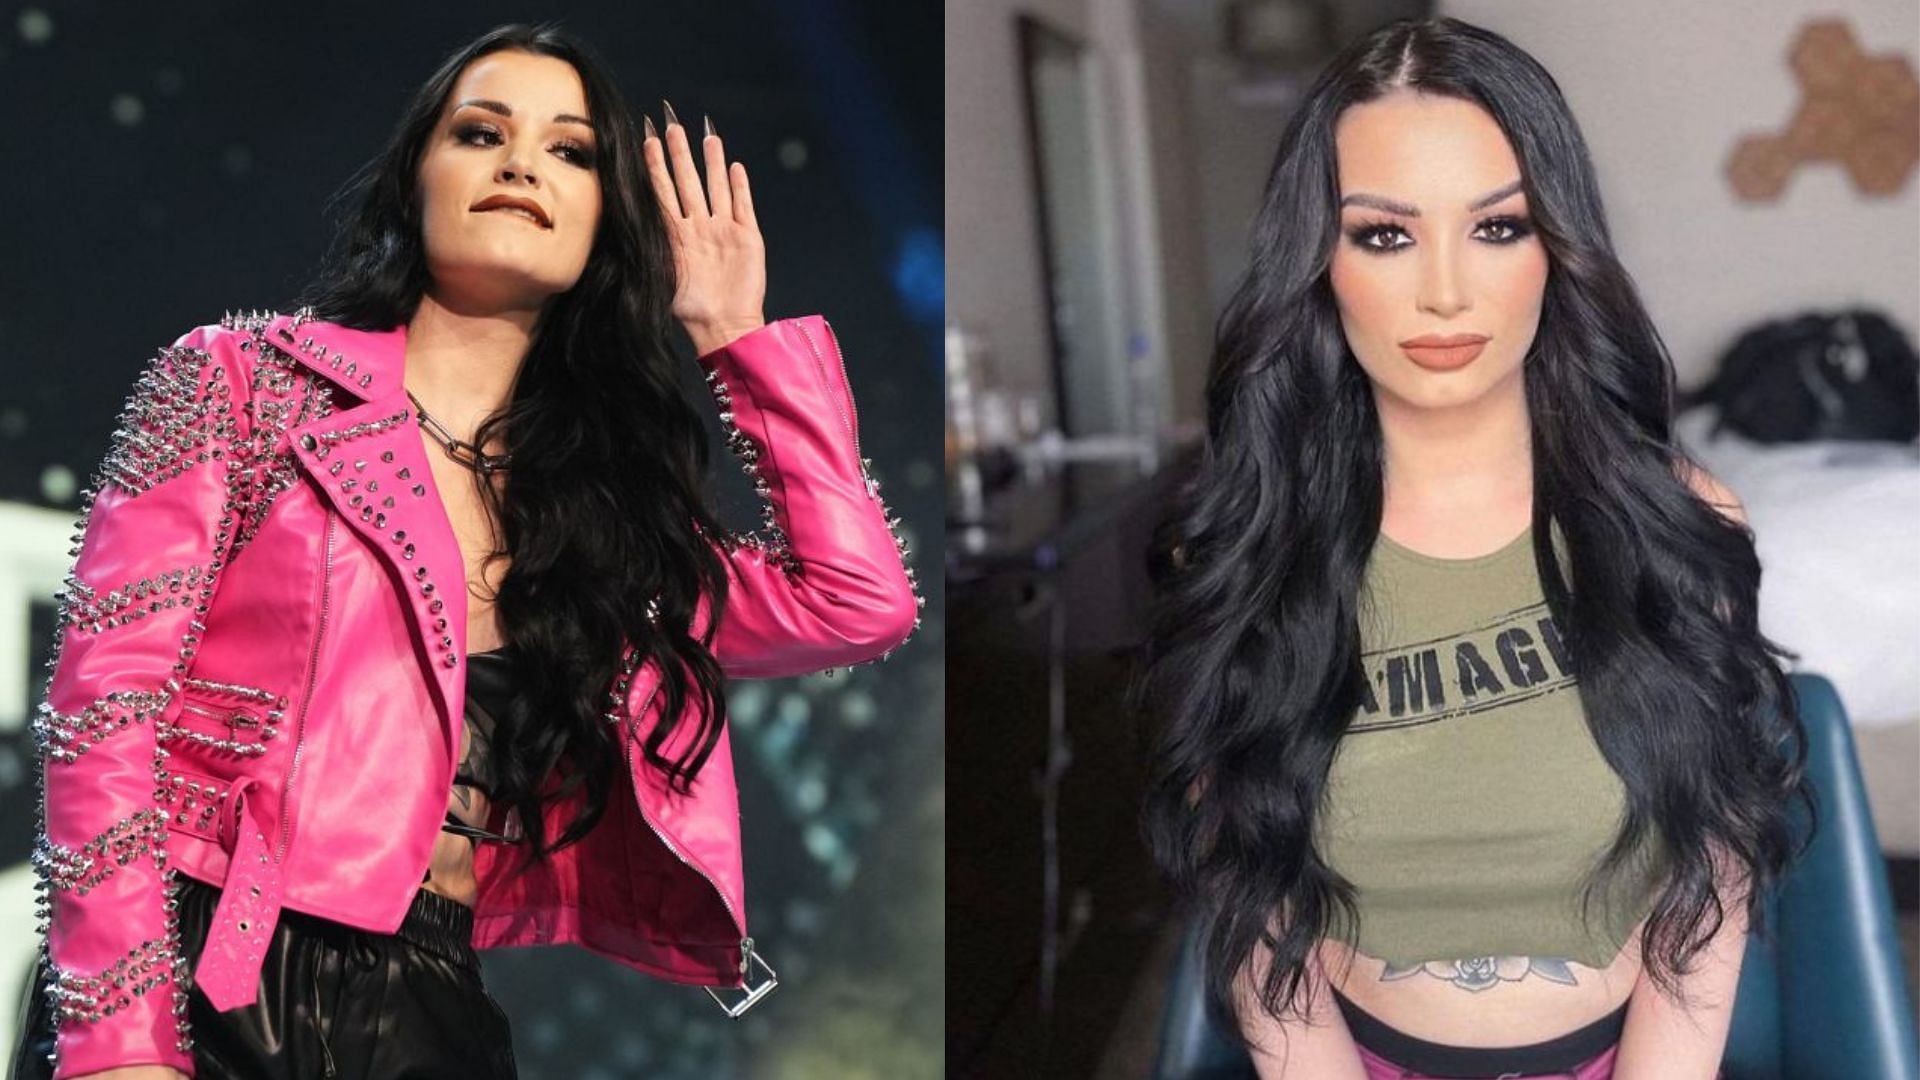 Saraya recently signed with All Elite Wrestling. 